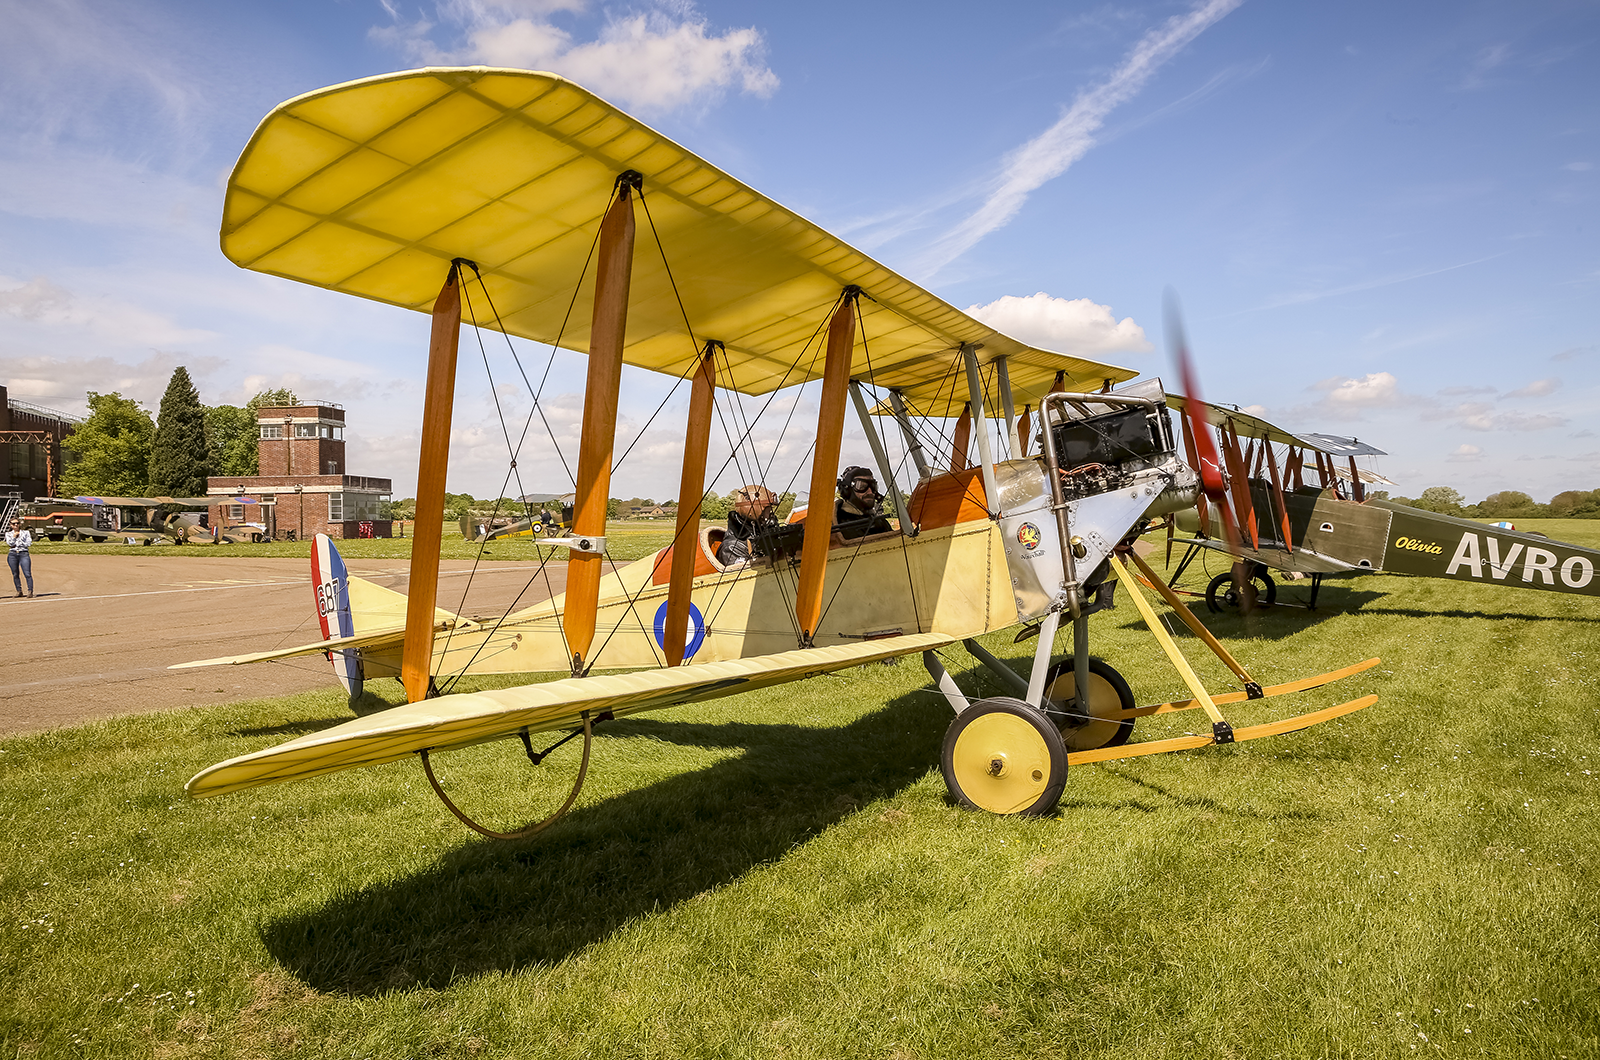 My flight in a WW1 plane over Bicester Heritage